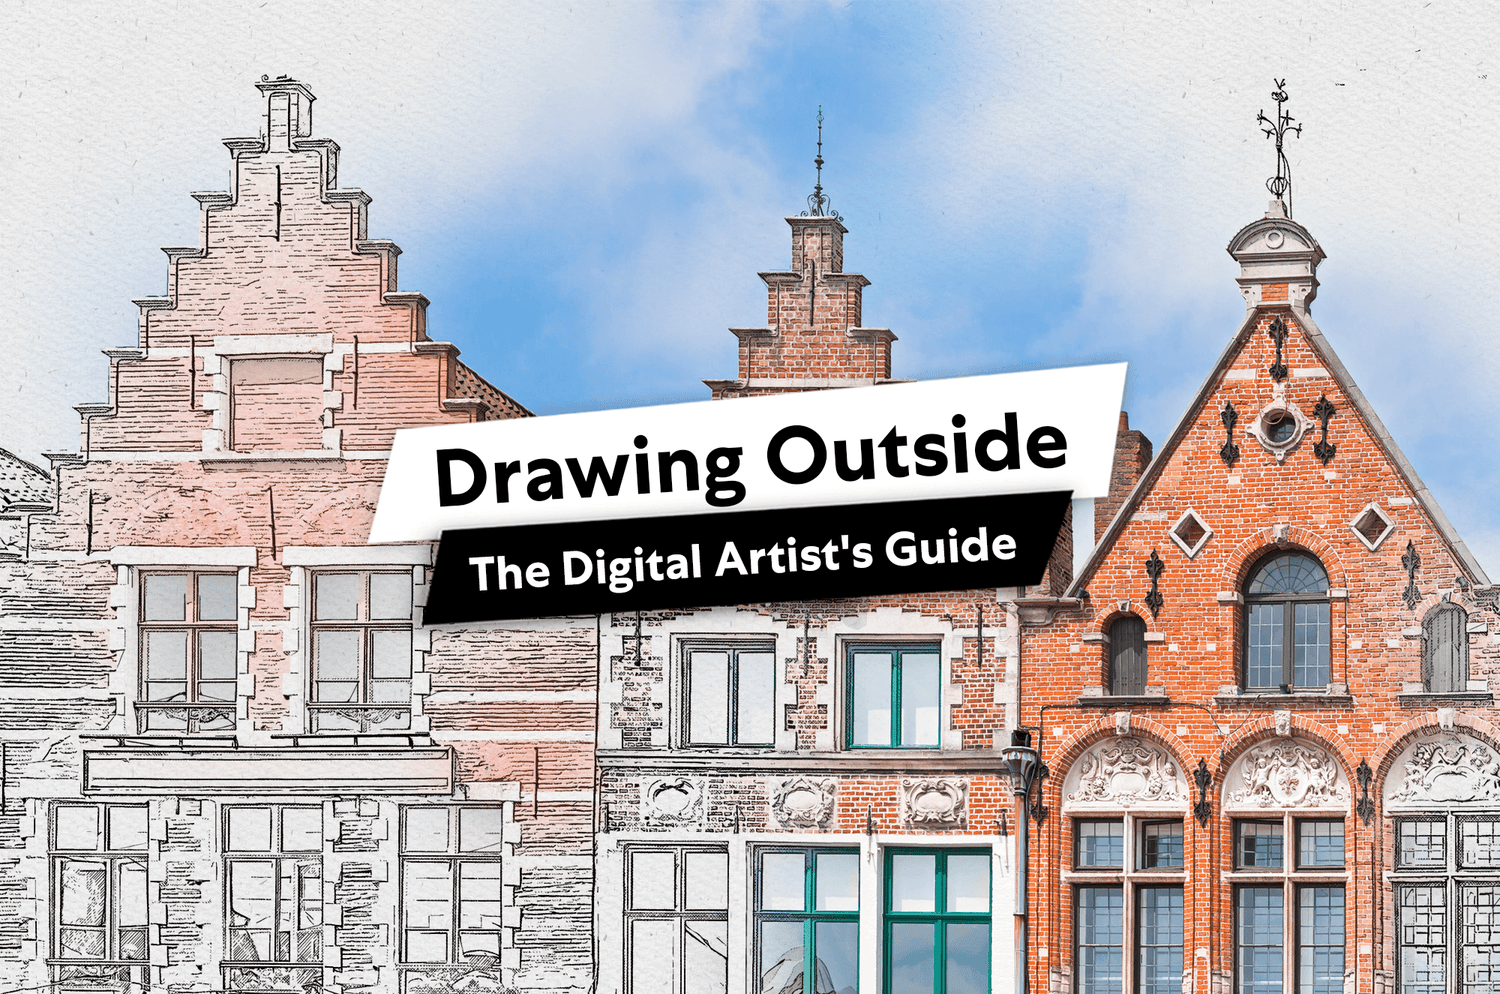 The title card image for "Drawing Outside: The Digital Artist's Guide."